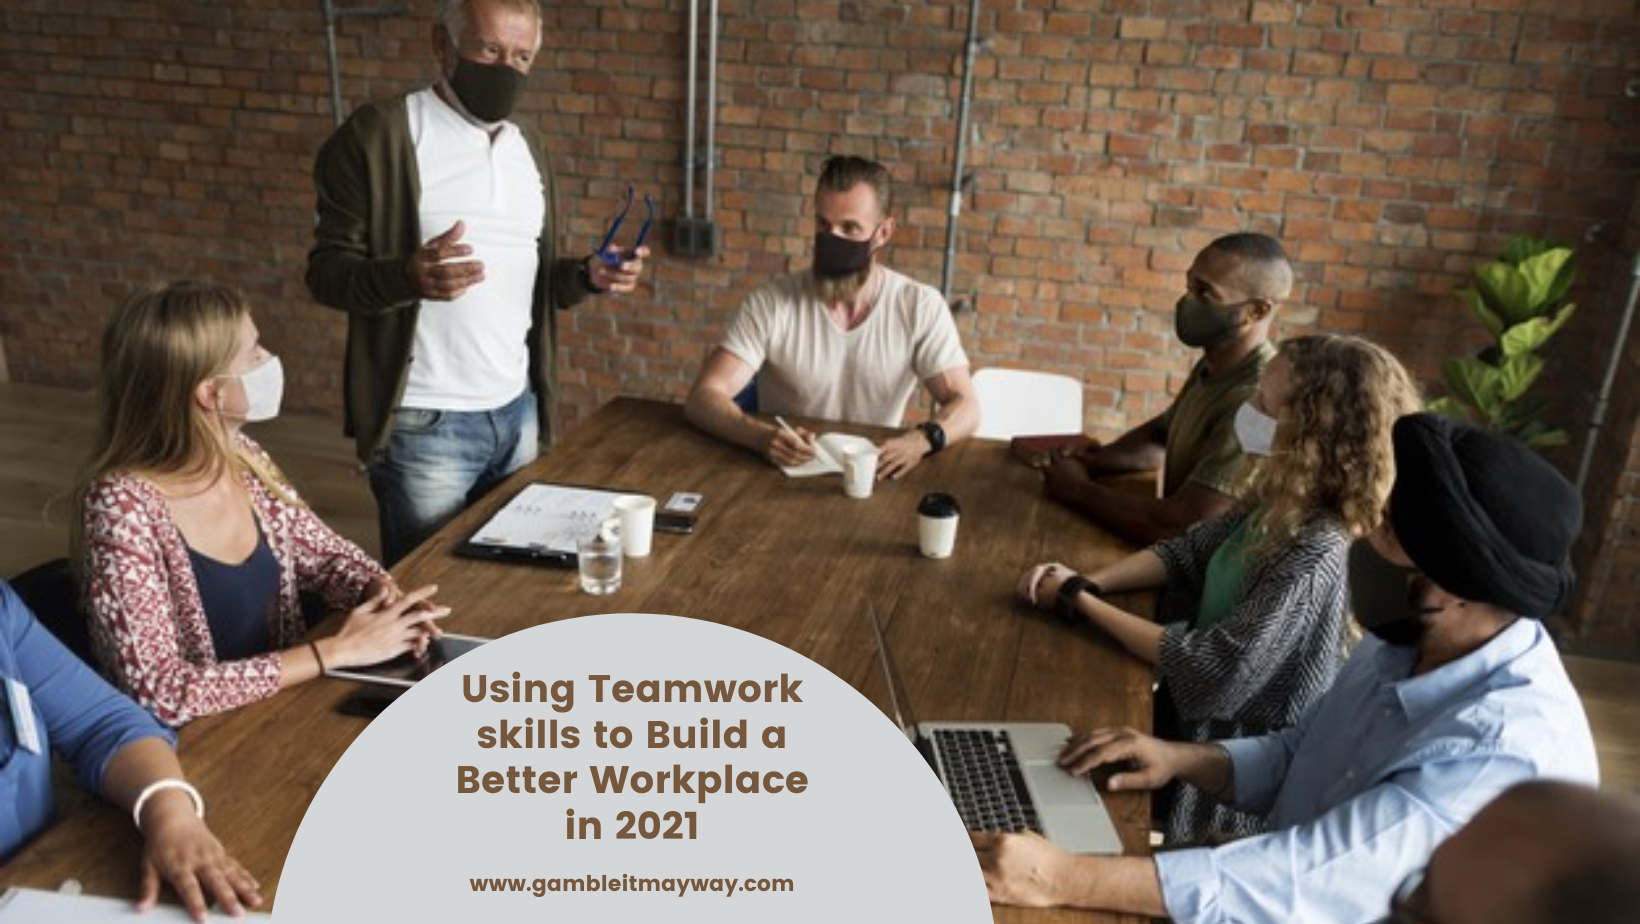 Using Teamwork skills to Build a Better Workplace in 2021